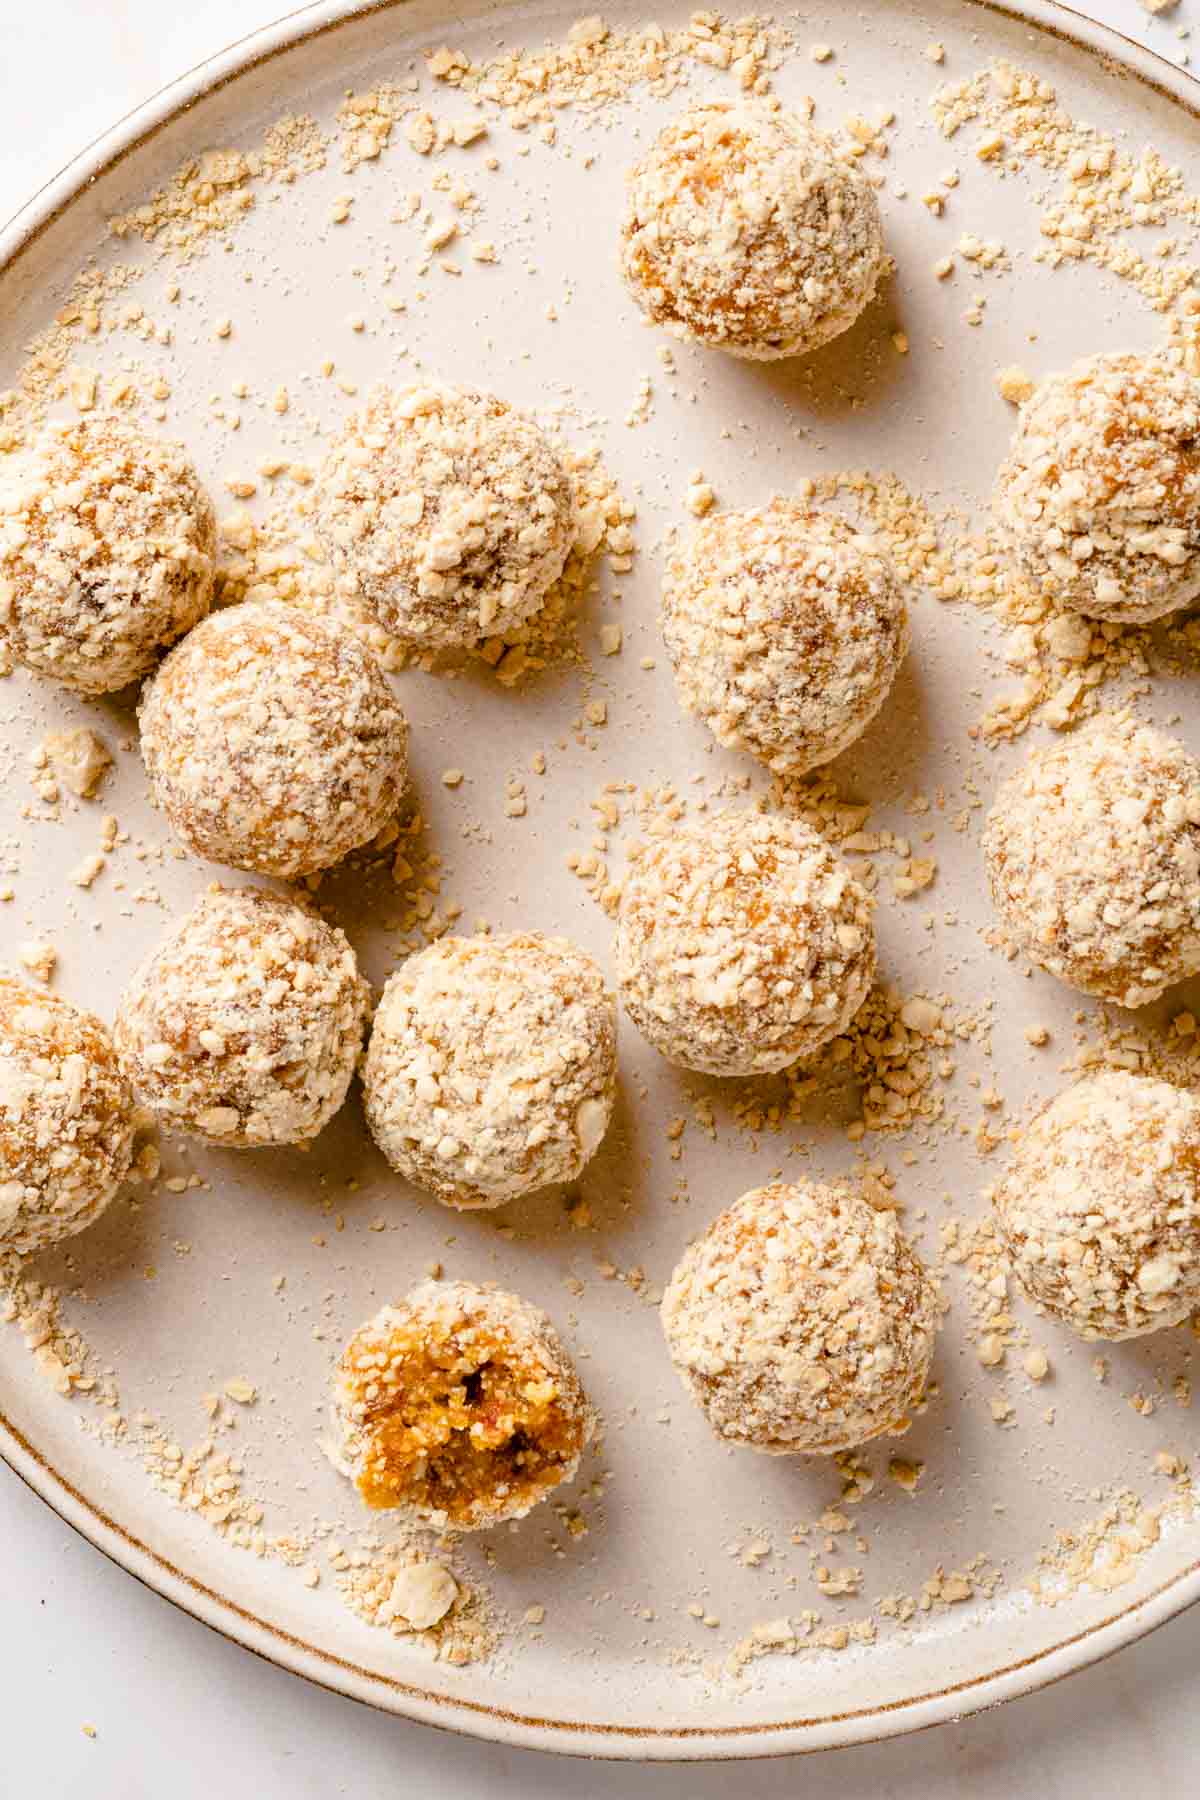 bliss balls on plate with chopped cashews